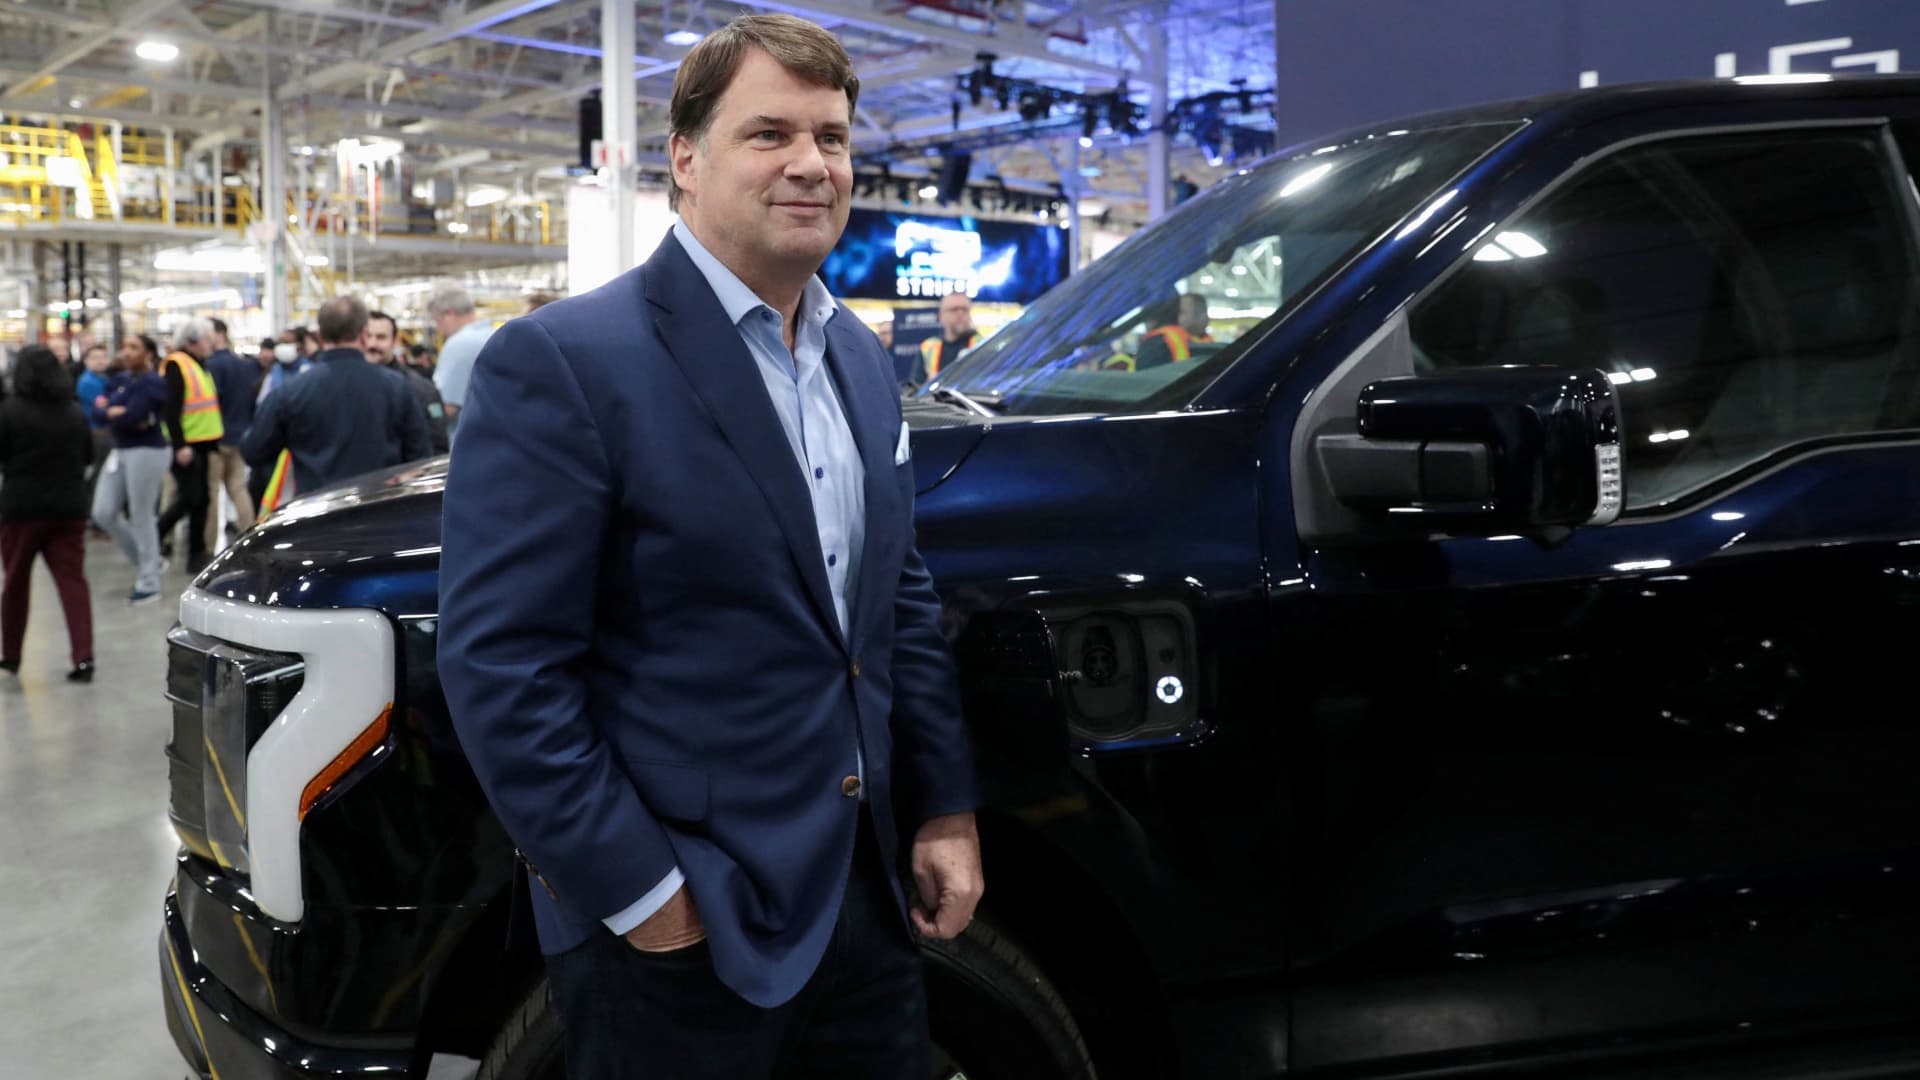 Ford CEO Farley warns of recession, as inflation and supply disruptions weigh on production - CNBC